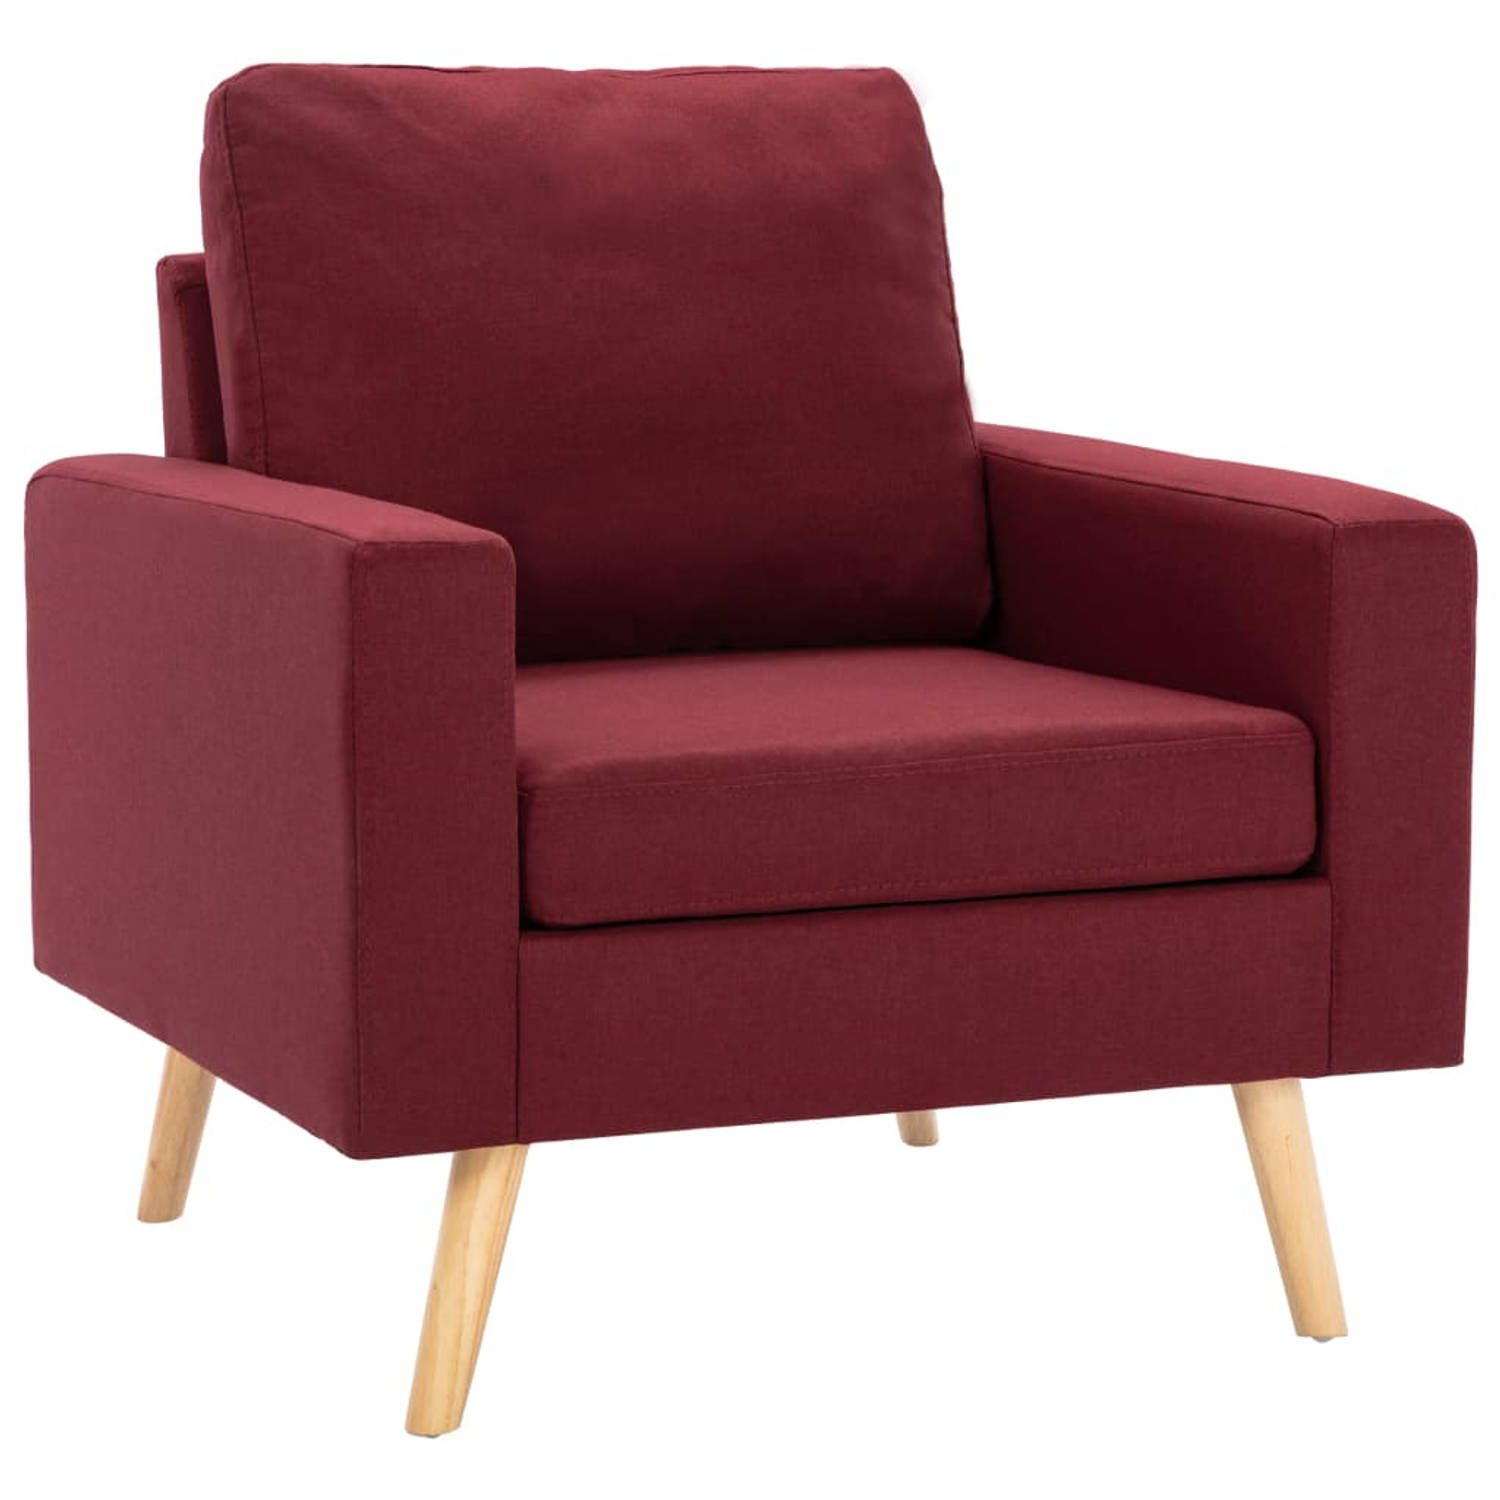 The Living Store Fauteuil stof wijnrood - Fauteuil